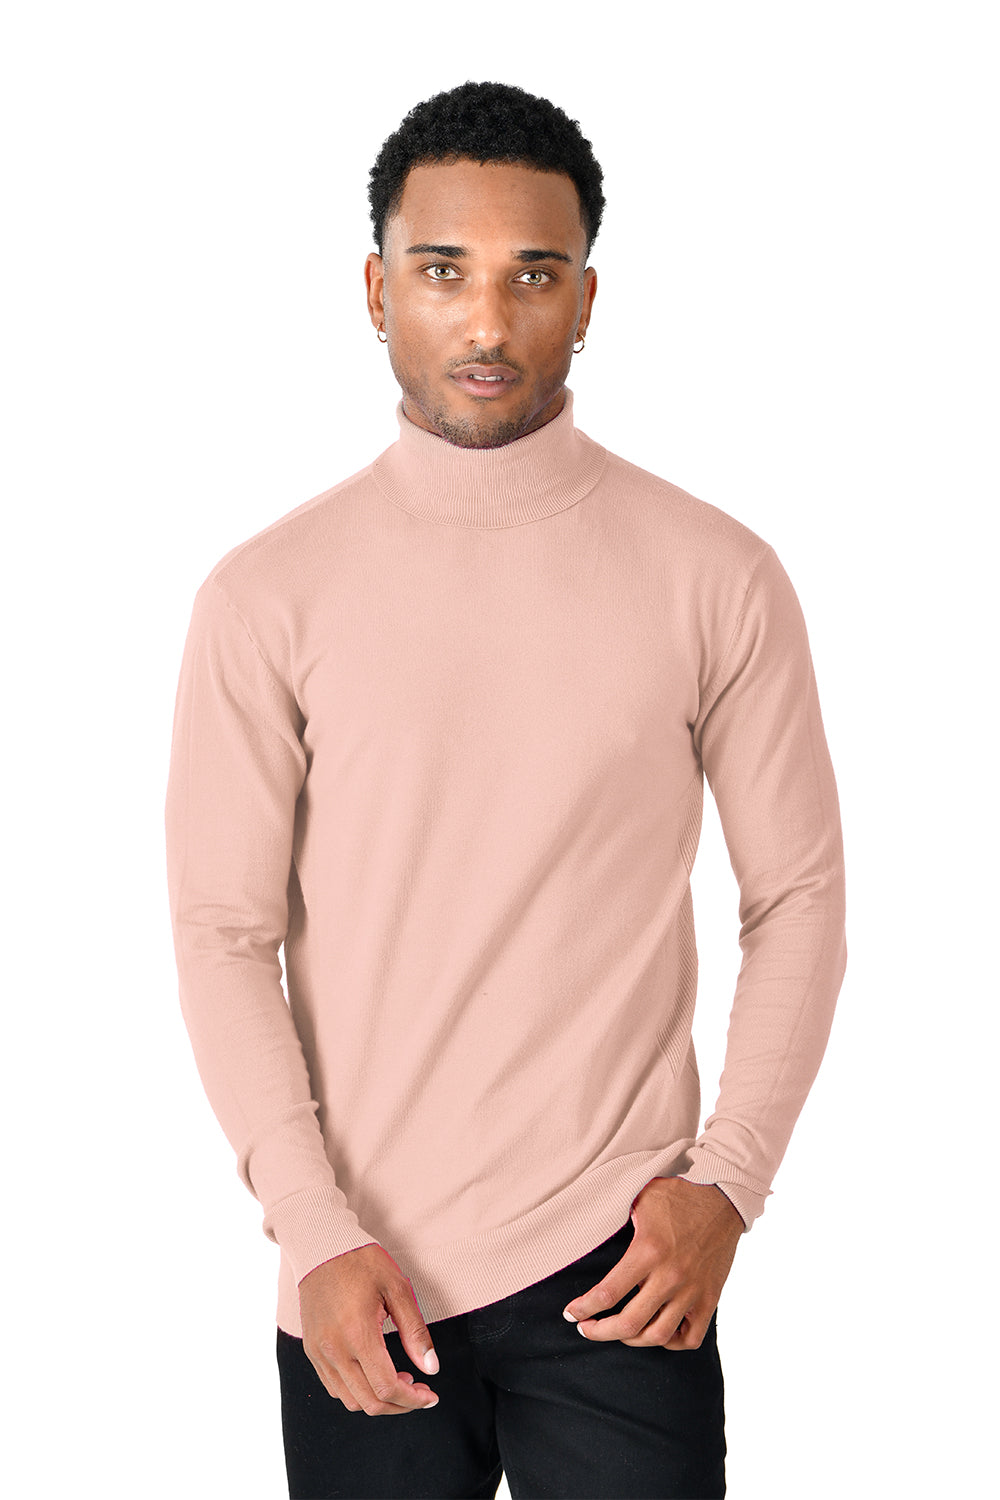 Men's Turtleneck Ribbed Solid Color Basic Sweater LS2100 Peach